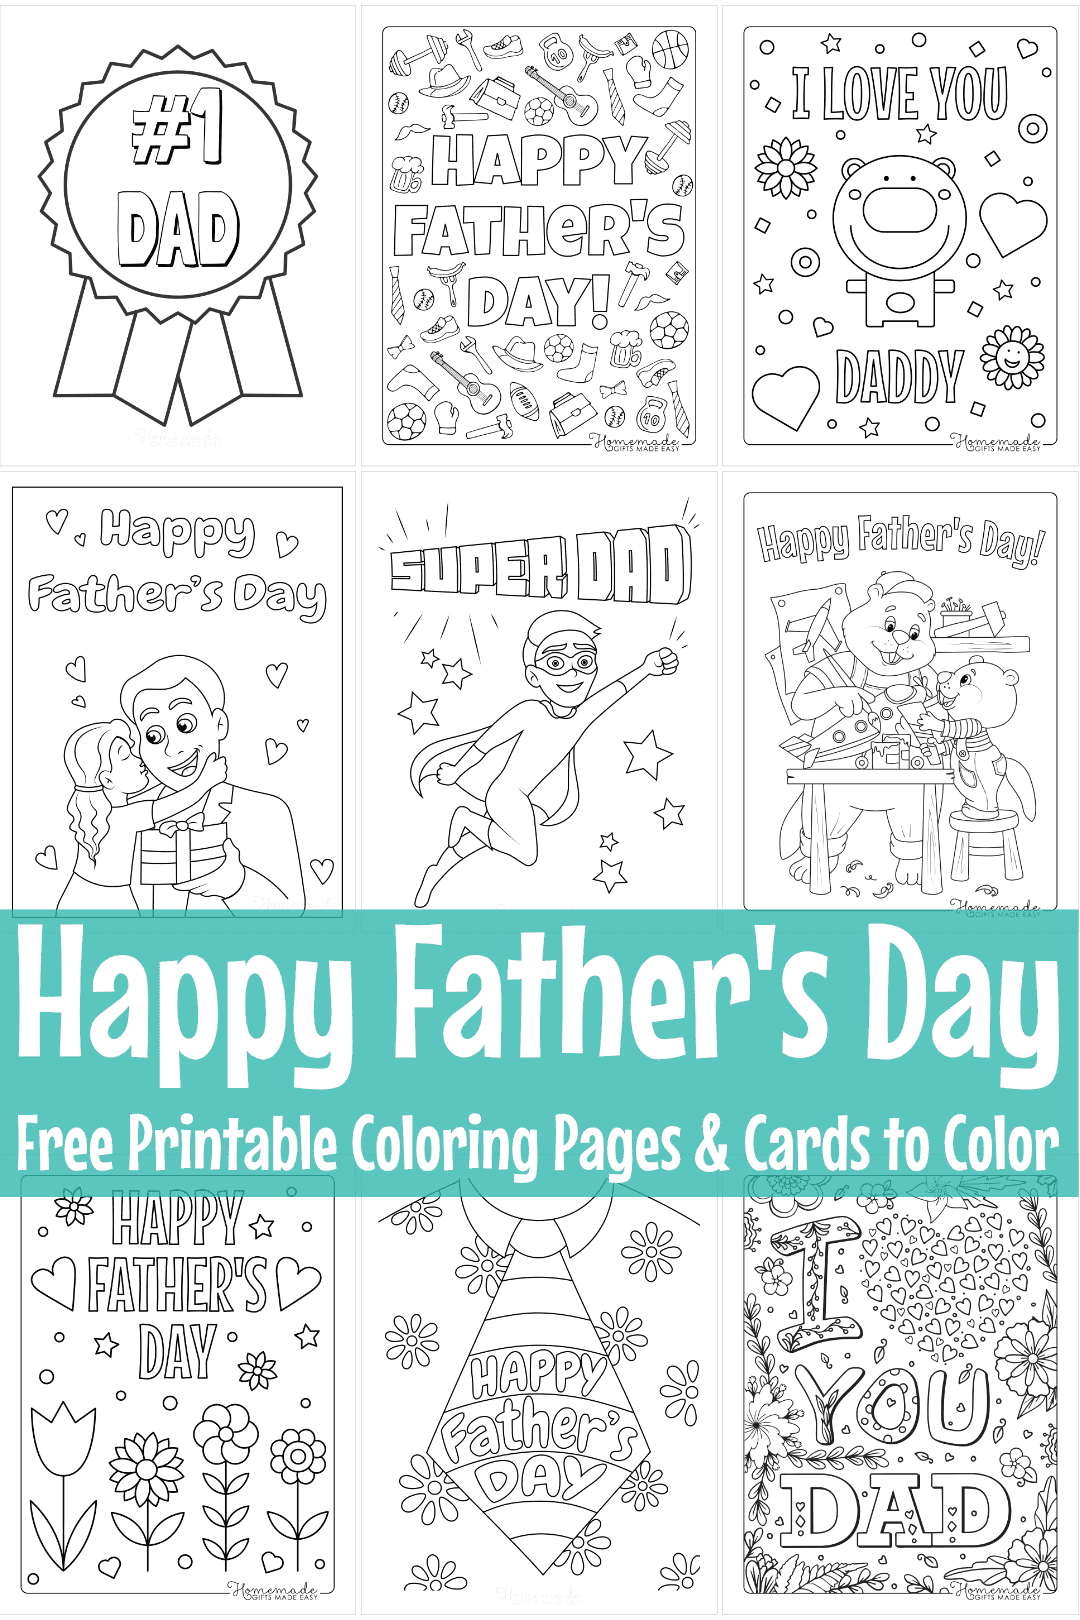  Poetry Gifts Dad or Grandpa Papa Bear and Me Poem in